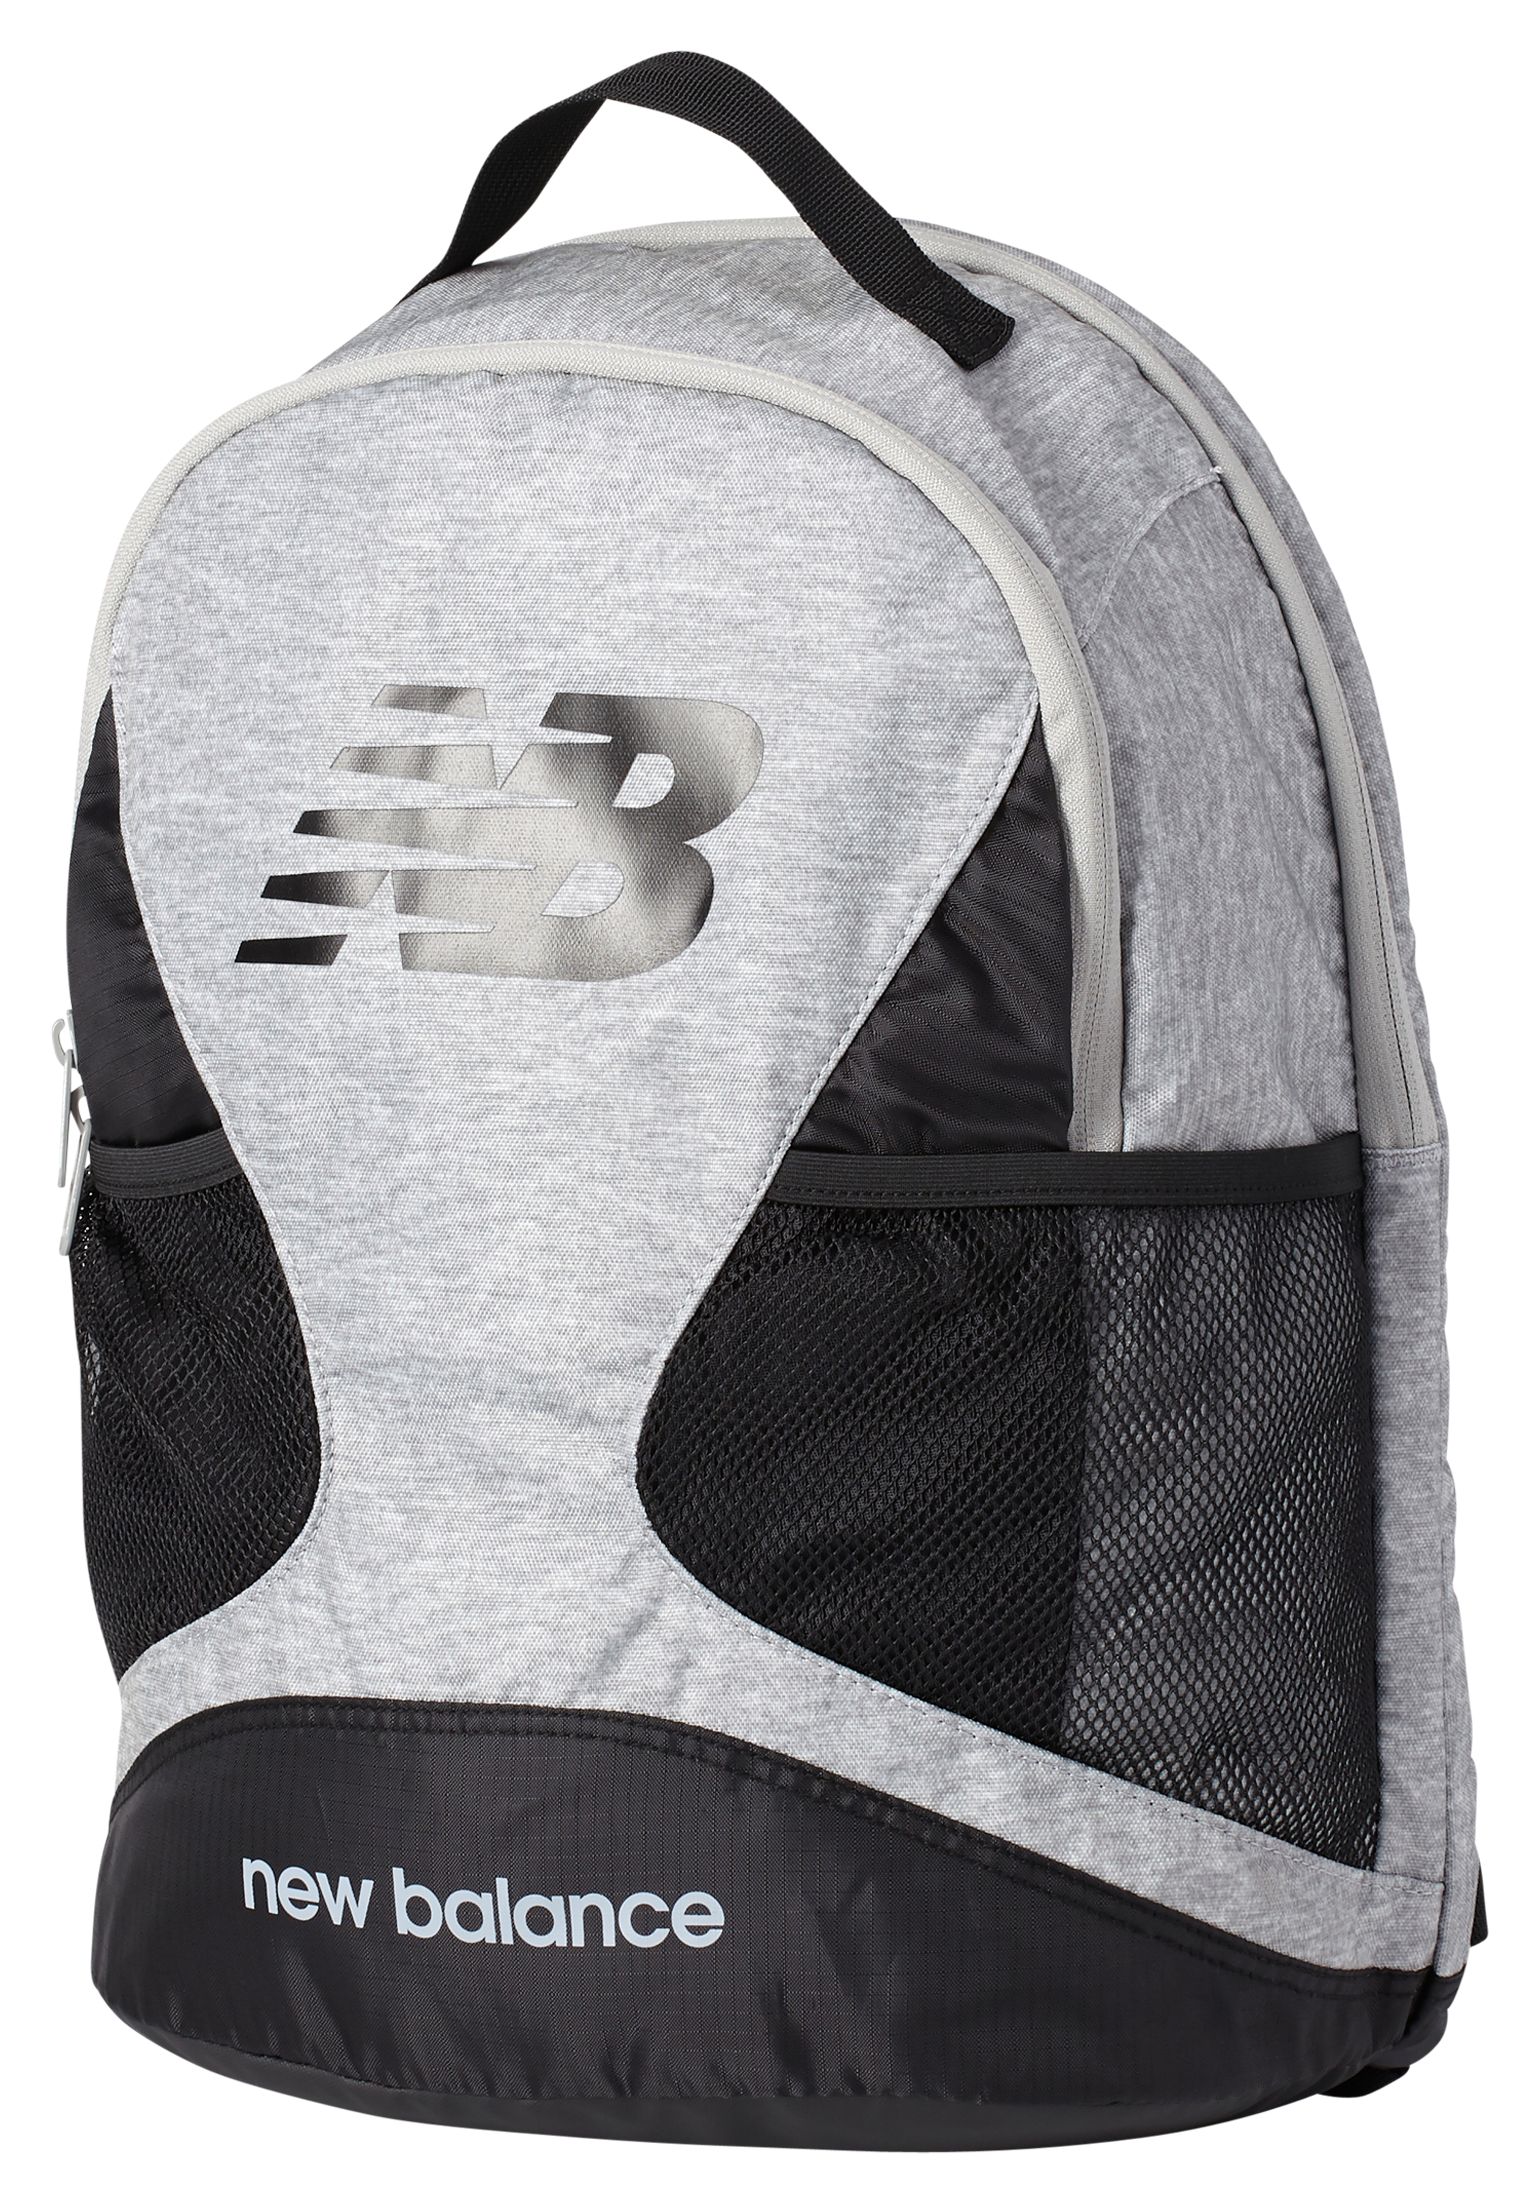 Athletic Backpacks & Gym Bags for Men - New Balance